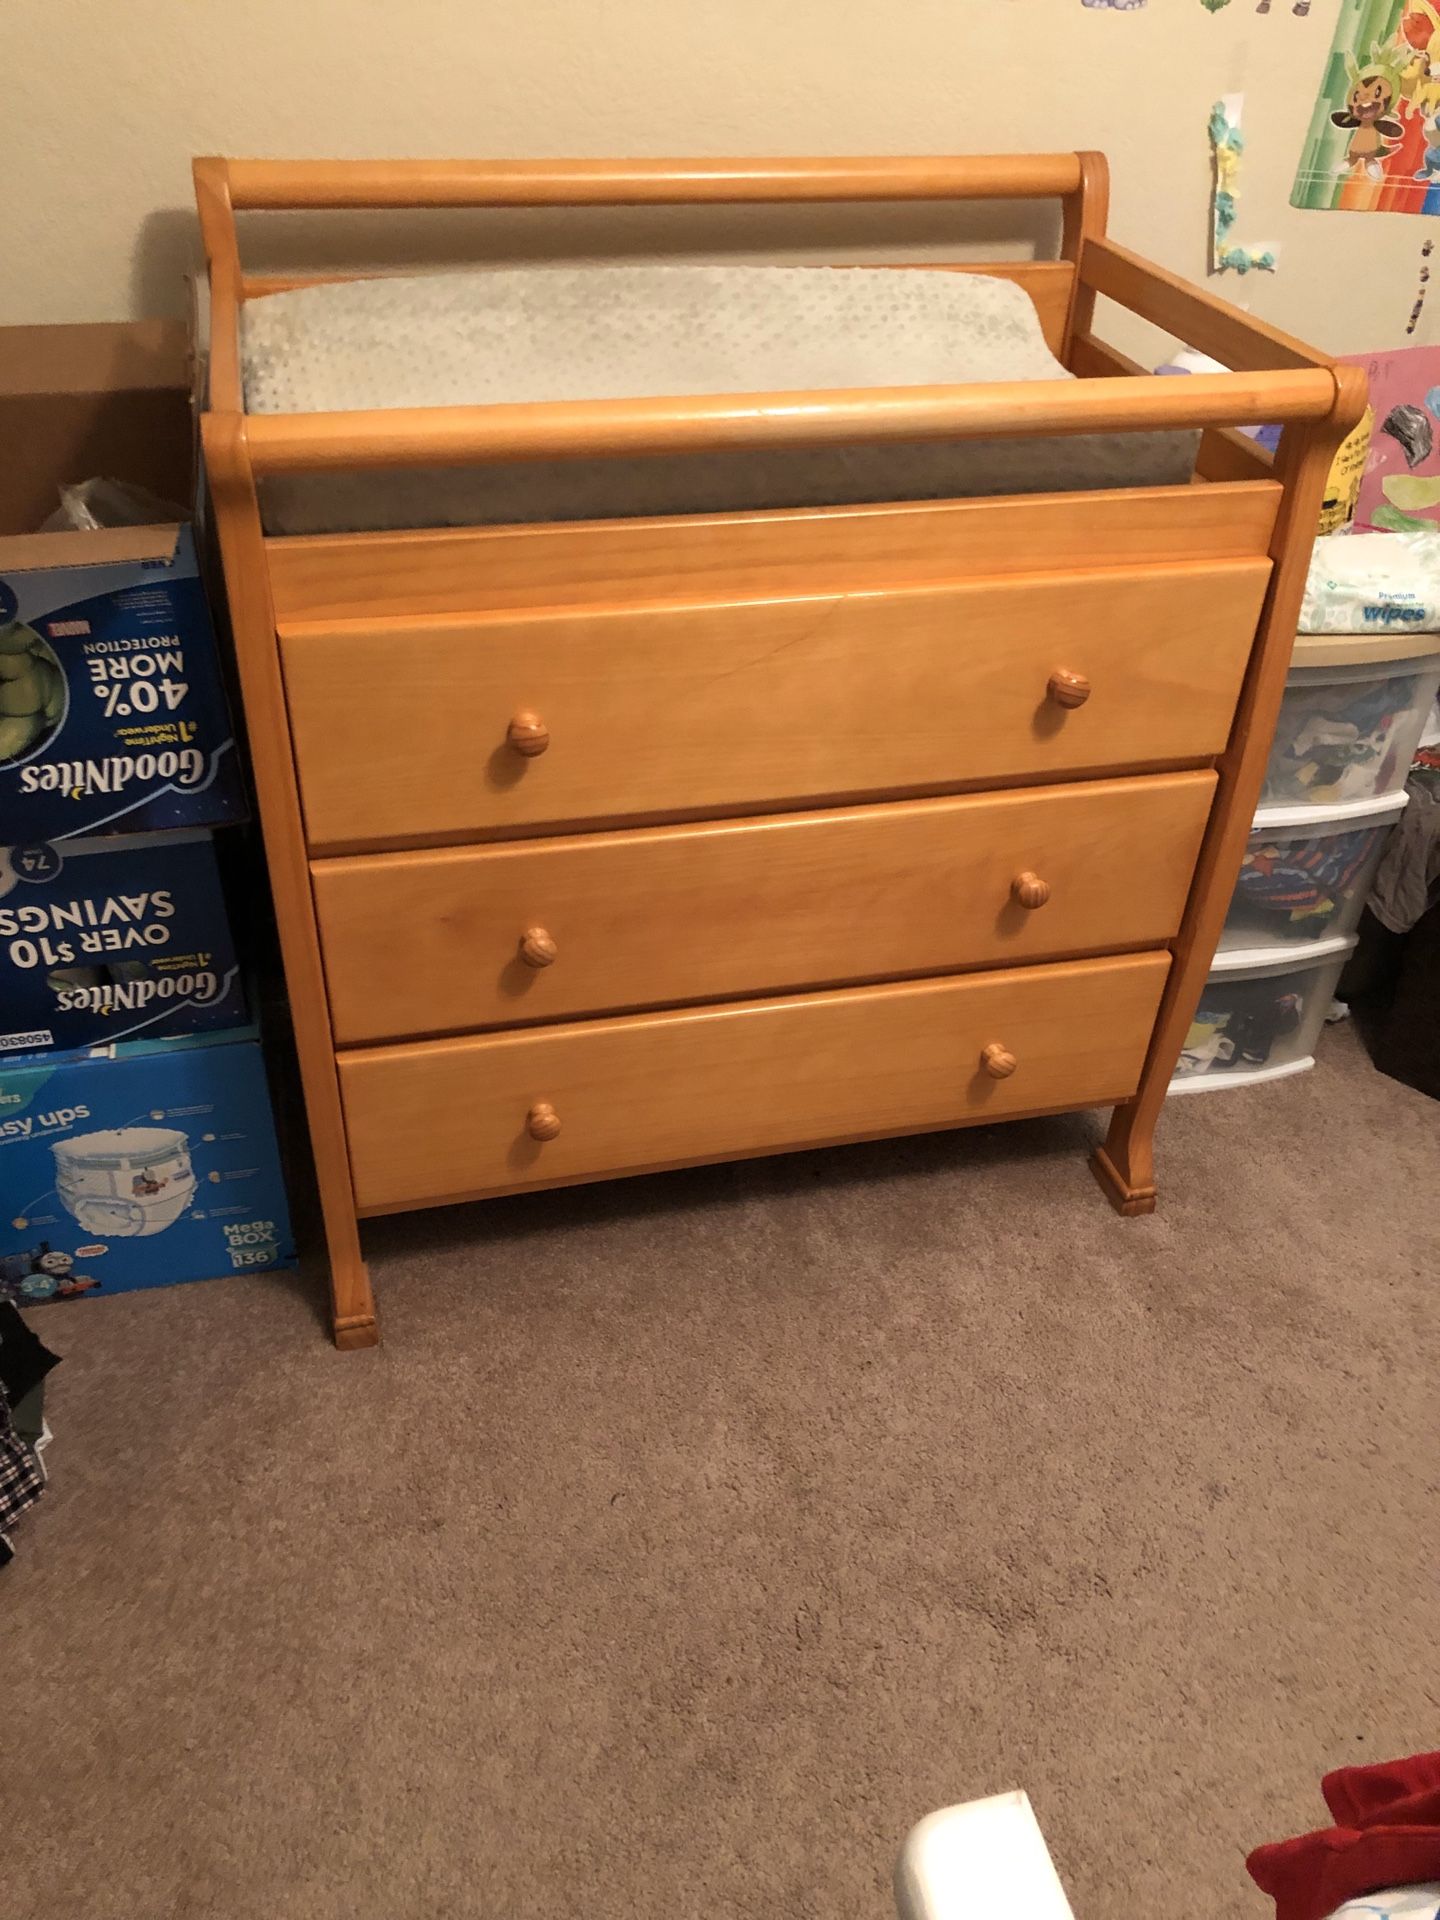 36.5” wide, 37” tall 23” deep changing table